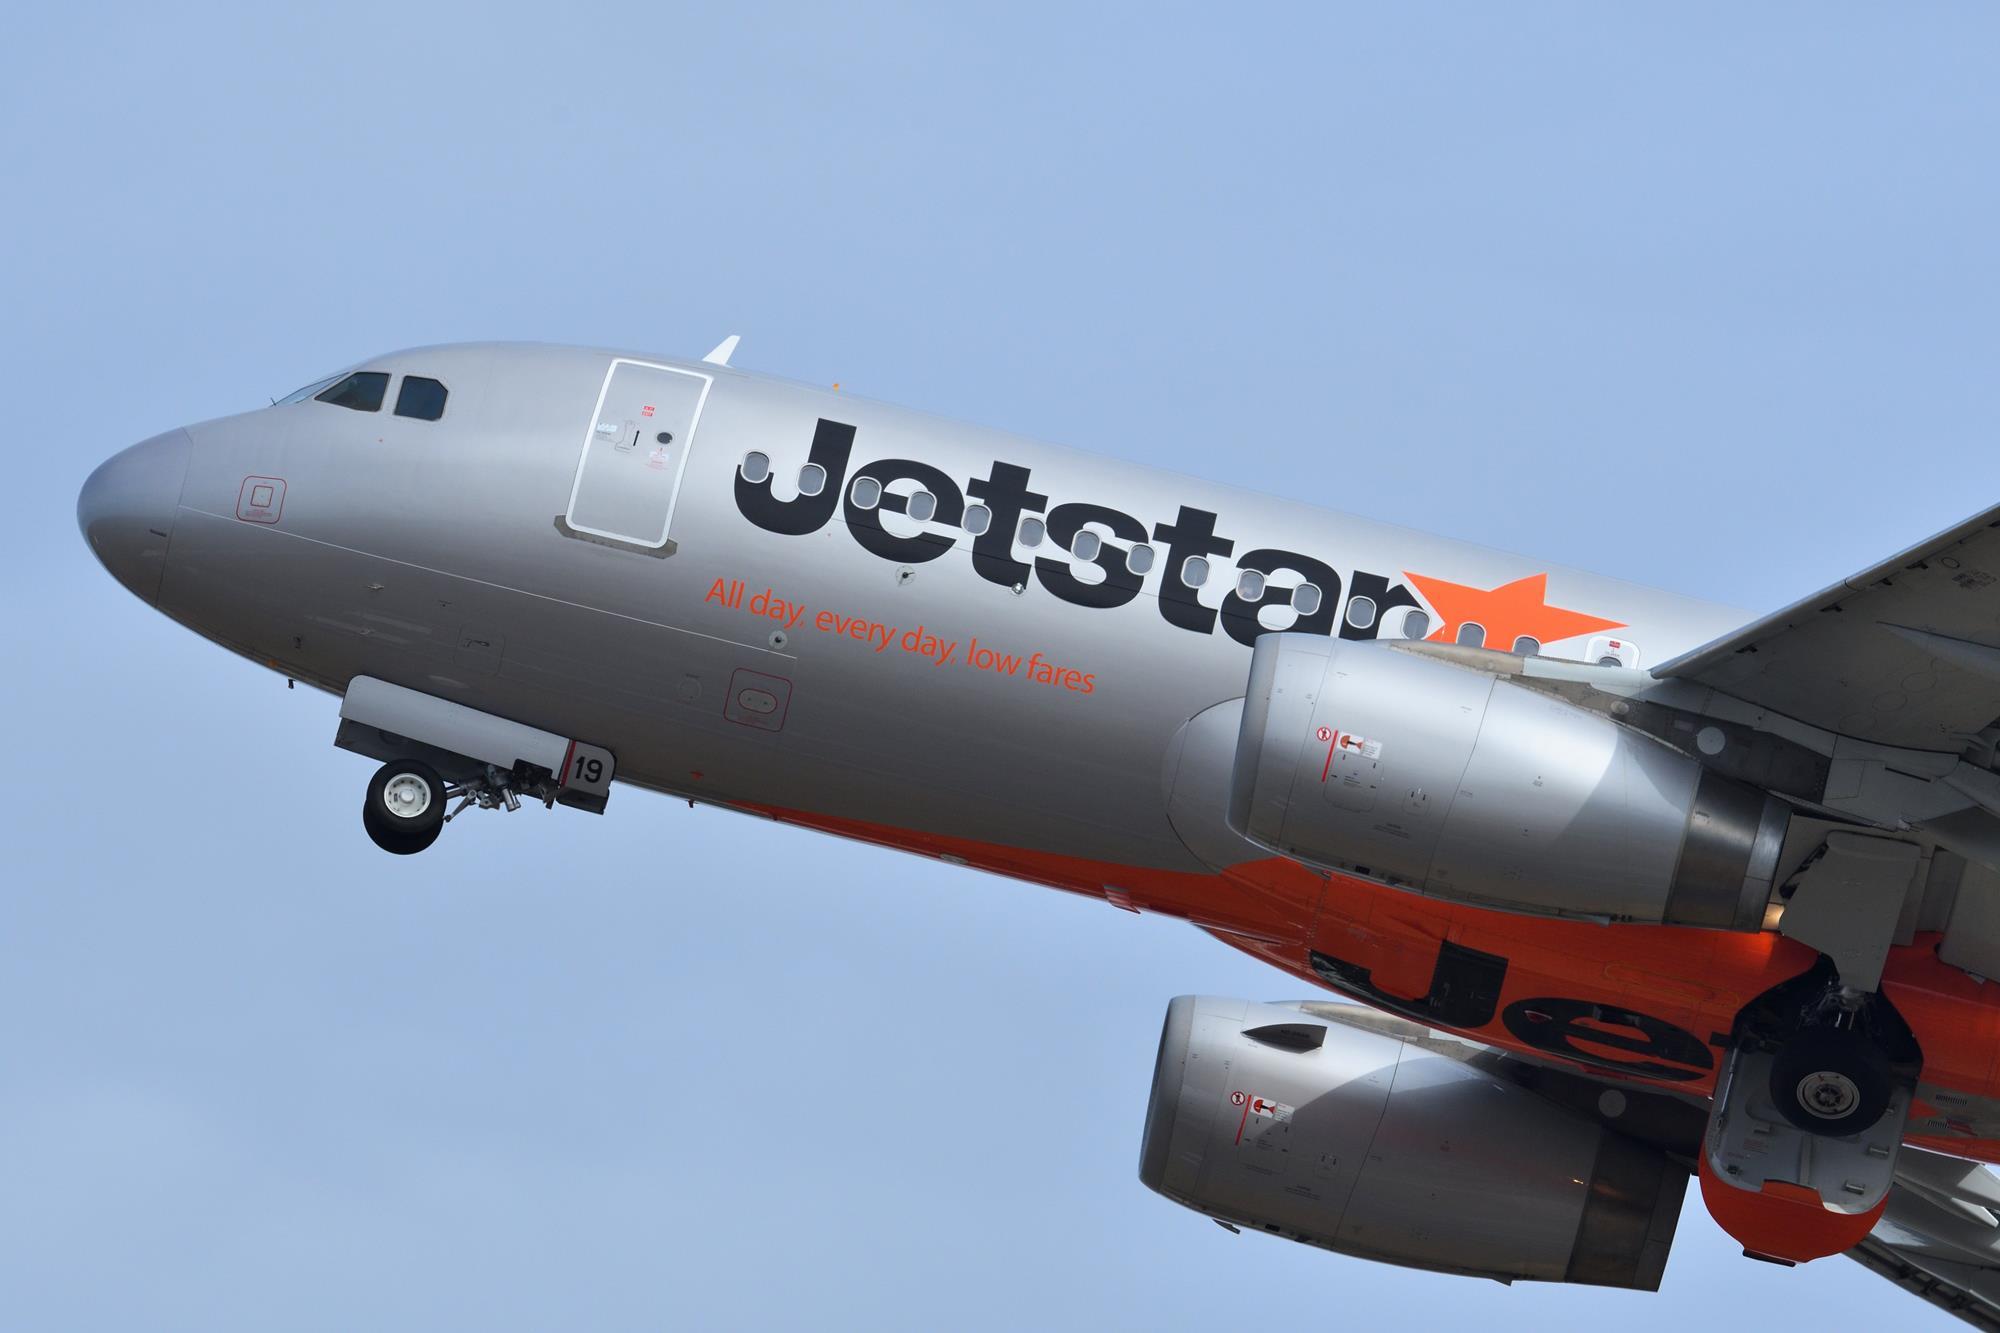 JetStar is set to offer new flight routes to other countries with VTLs to Singapore, including Penang. Image credit: FlightGlobal